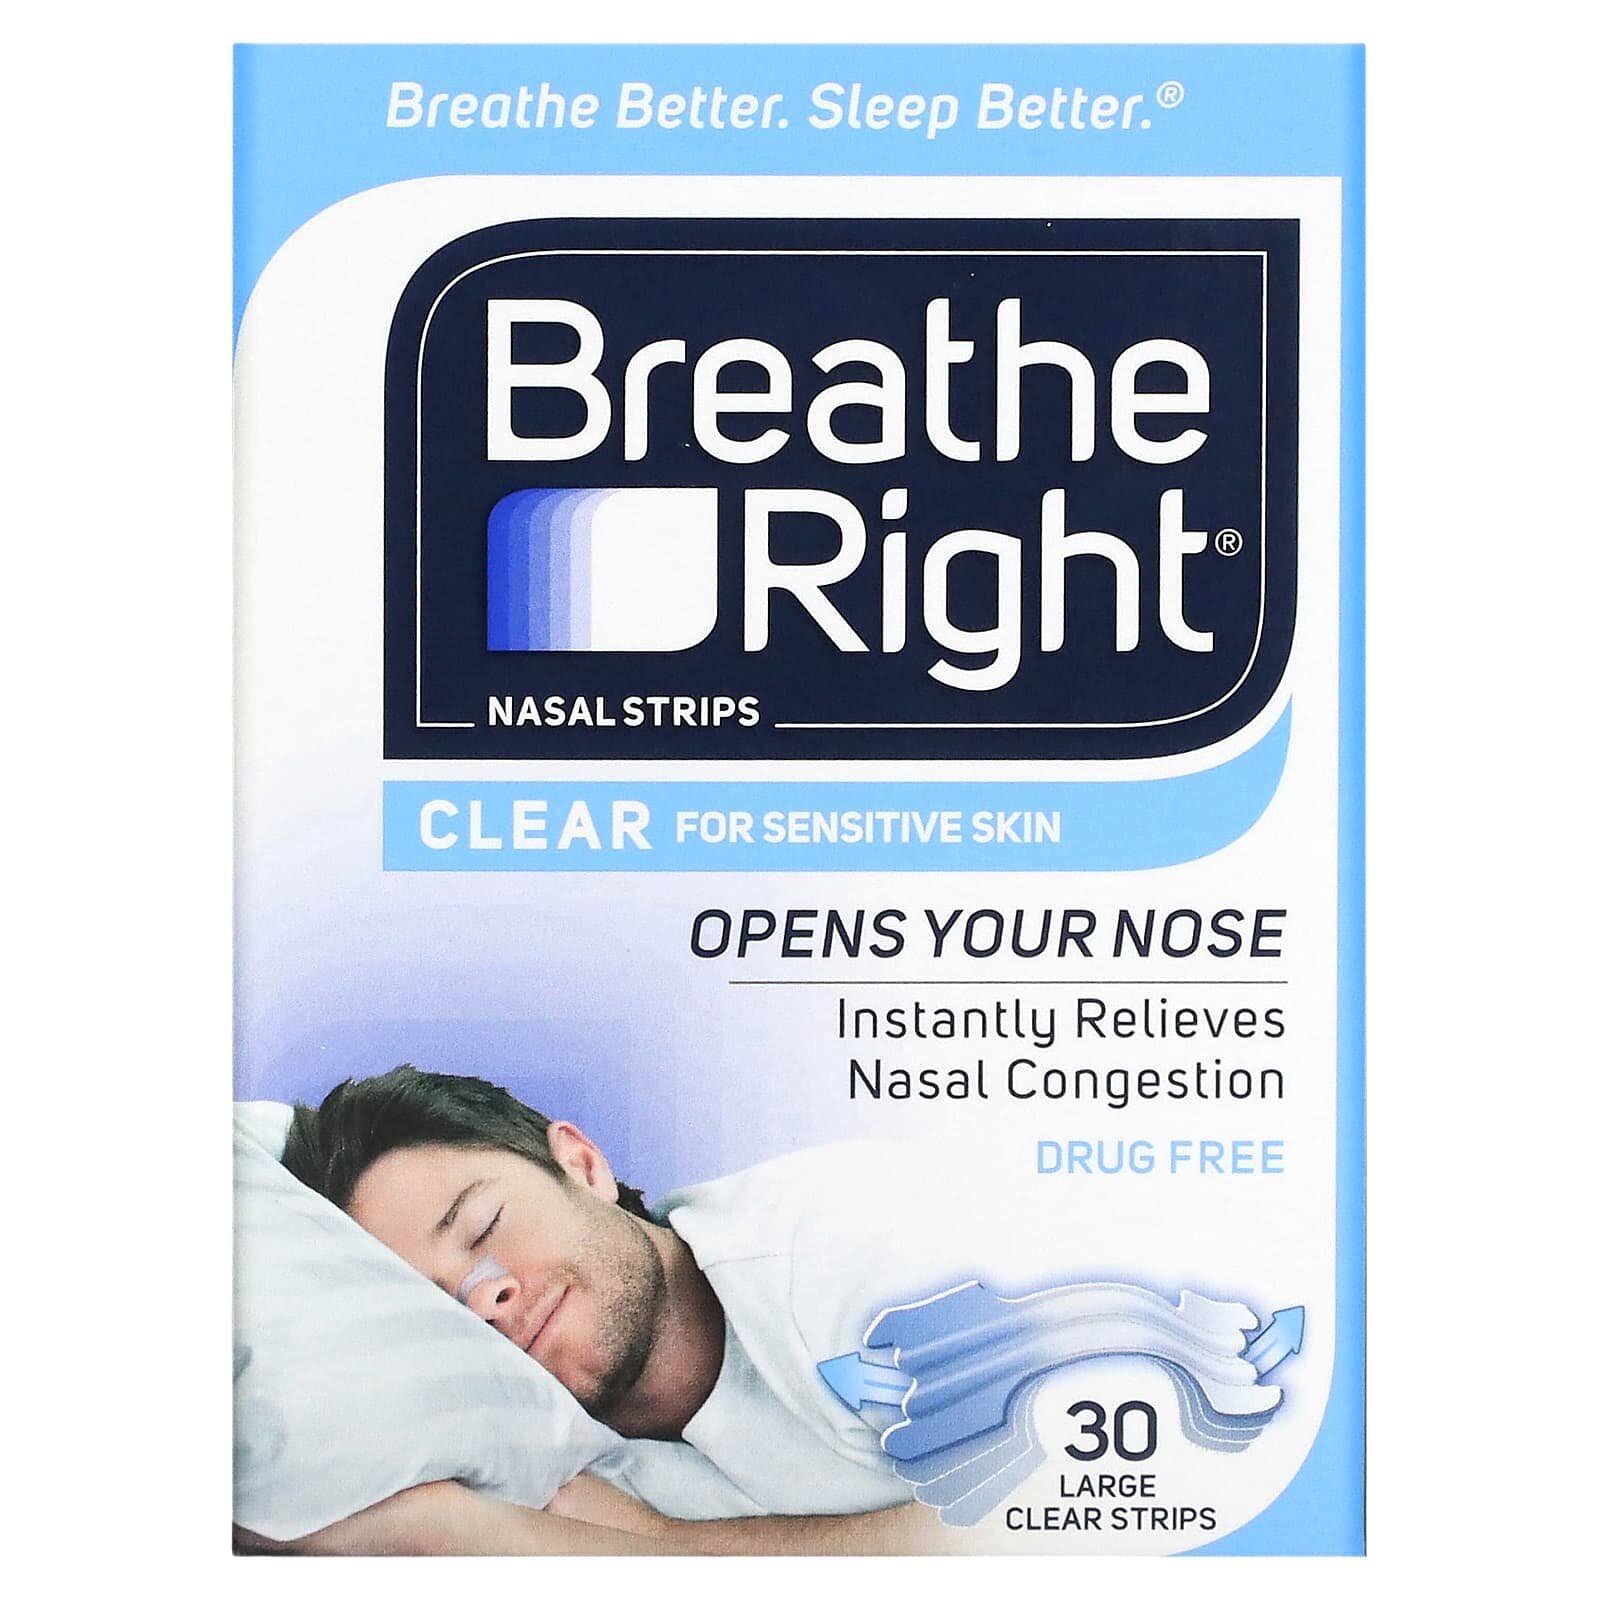 Breathe Right, Nasal Strips, Clear for Sensitive Skin, Large, 30 Clear Strips